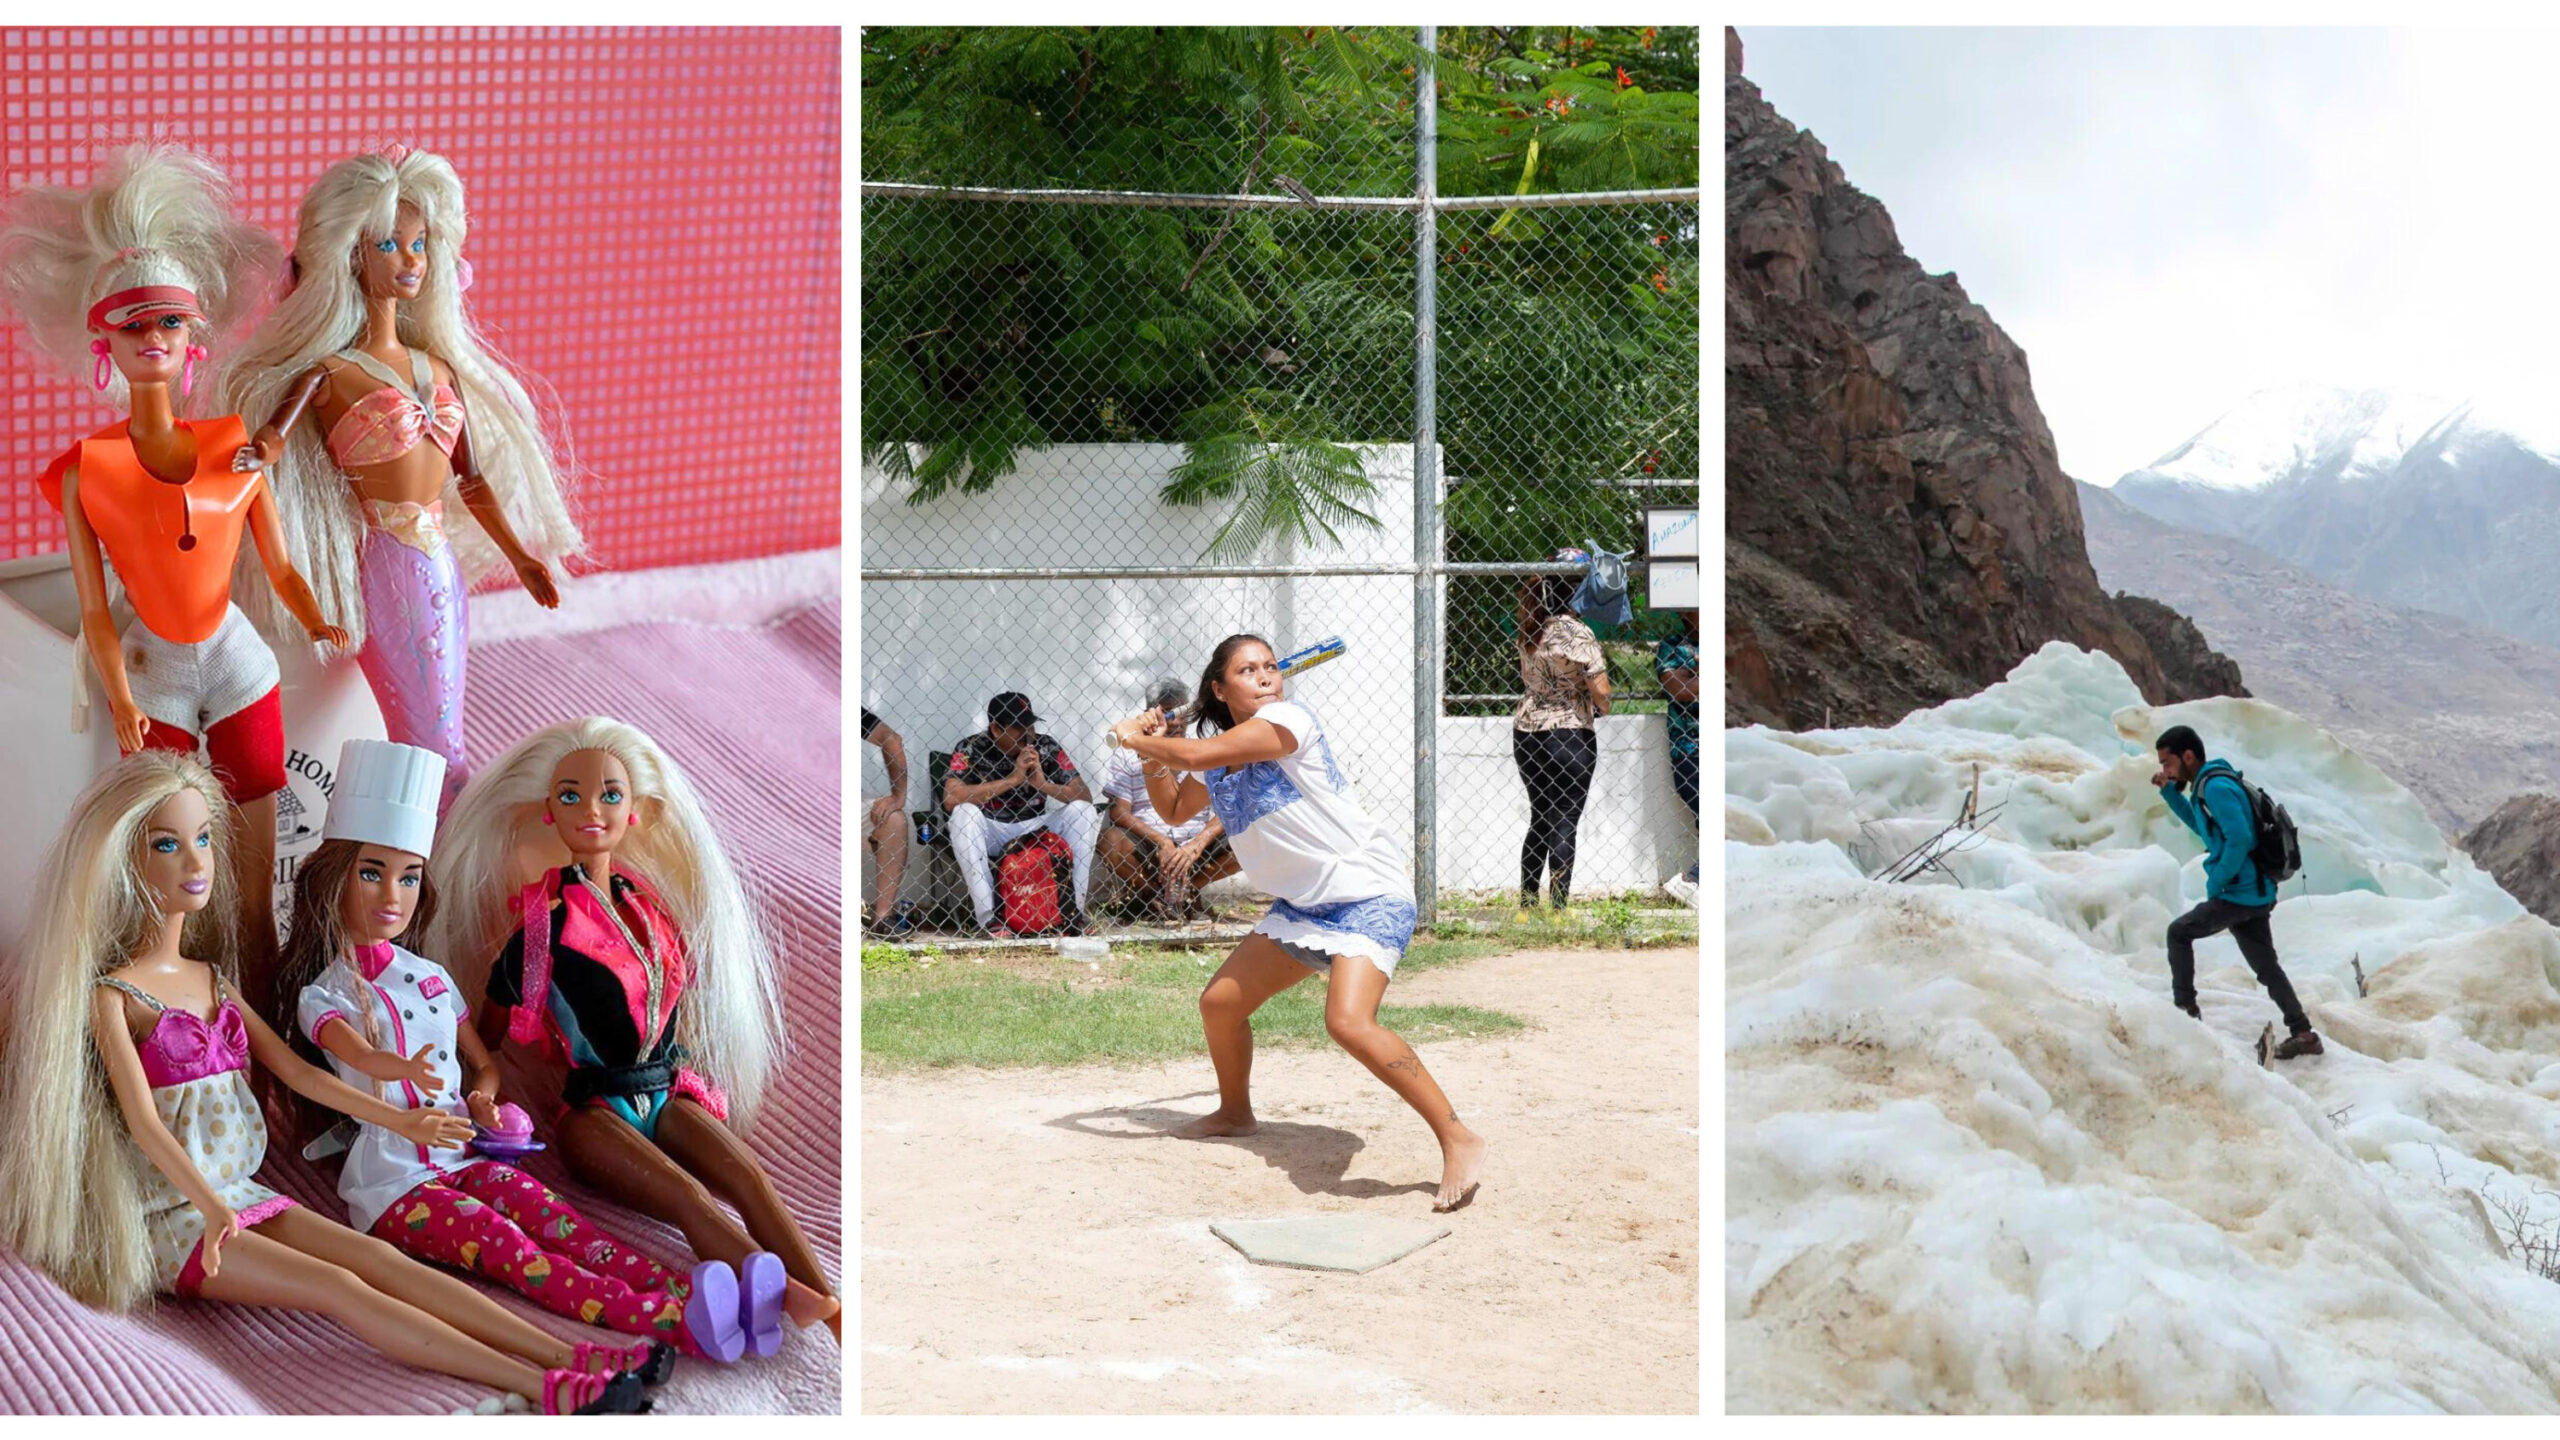 From glacier babies to a Barbie debate: 7 great global stories you might have missed